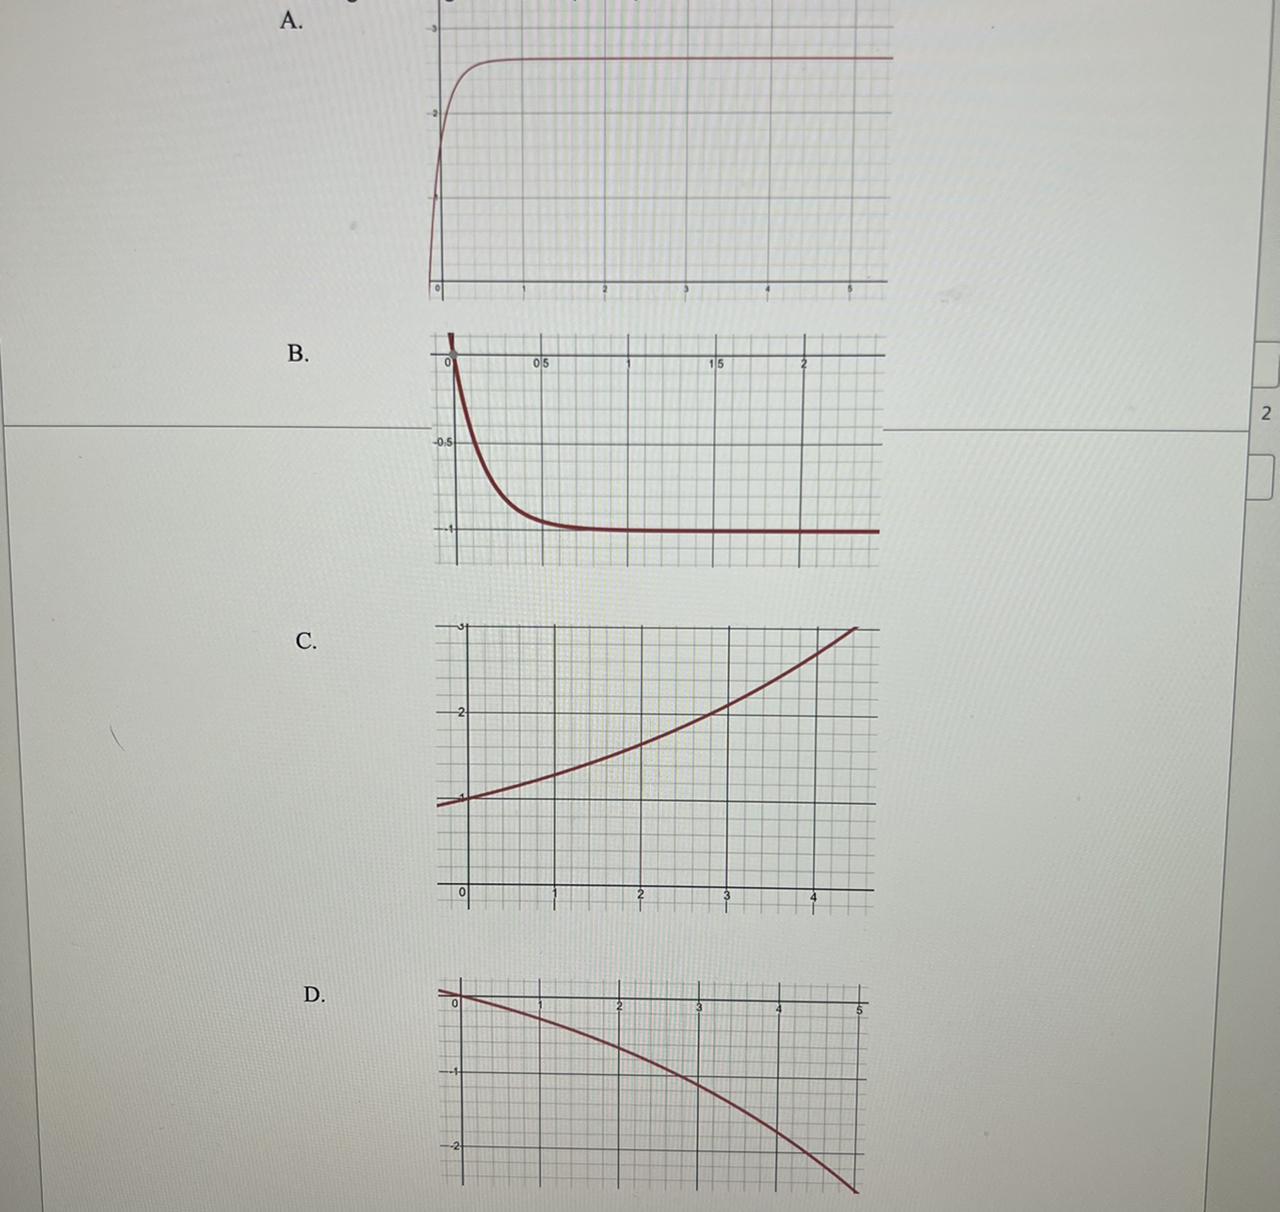 Which Of The Following Is A Graph Of The Velocity Of An Object As It Falls Fromrest If Drag Is Not Ignored?